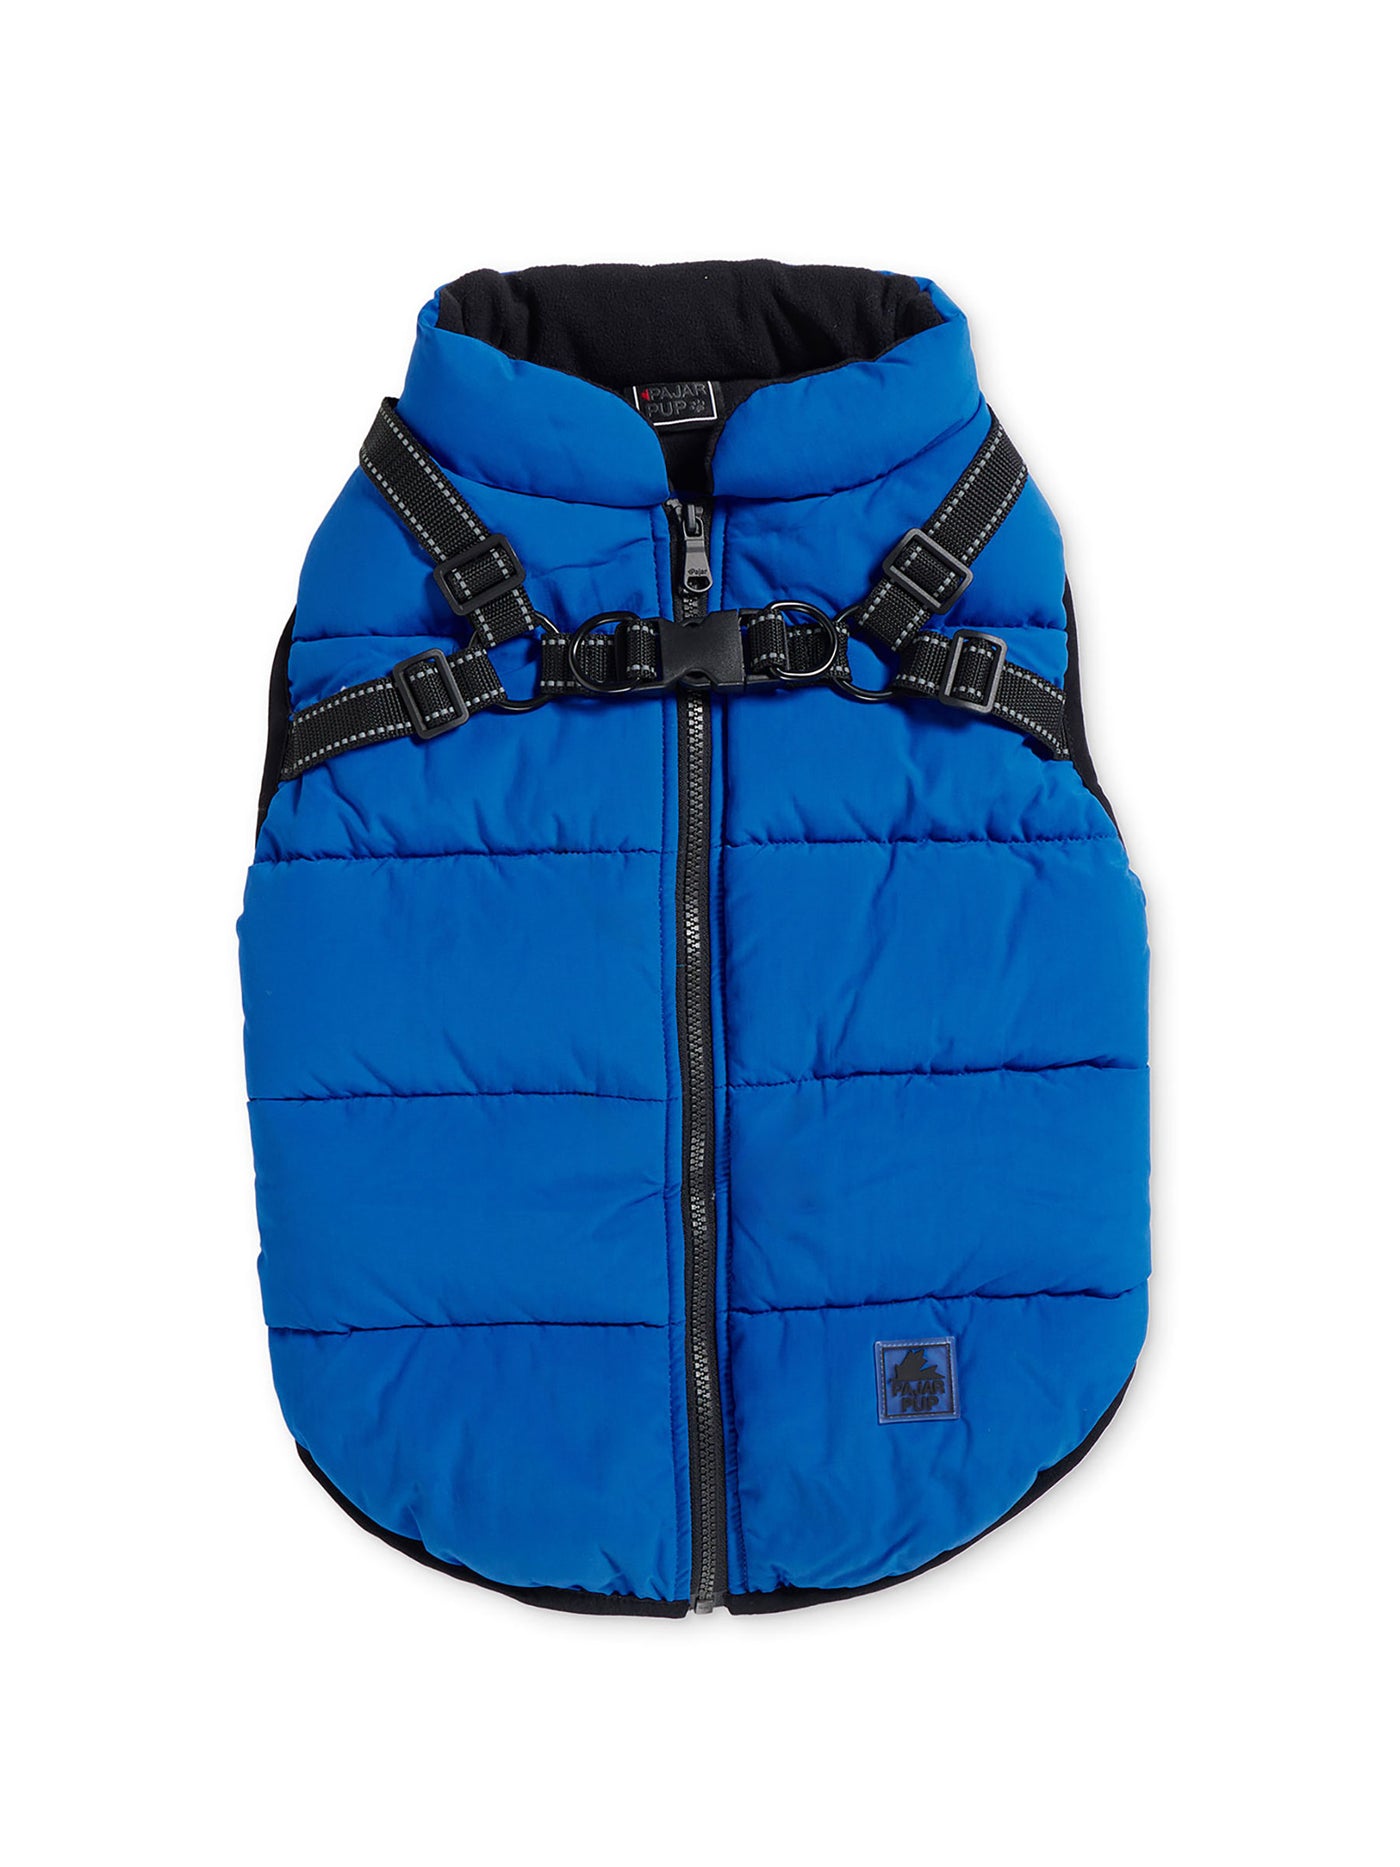 Atlas Puffer Jacket with Built-In Harness for Dogs